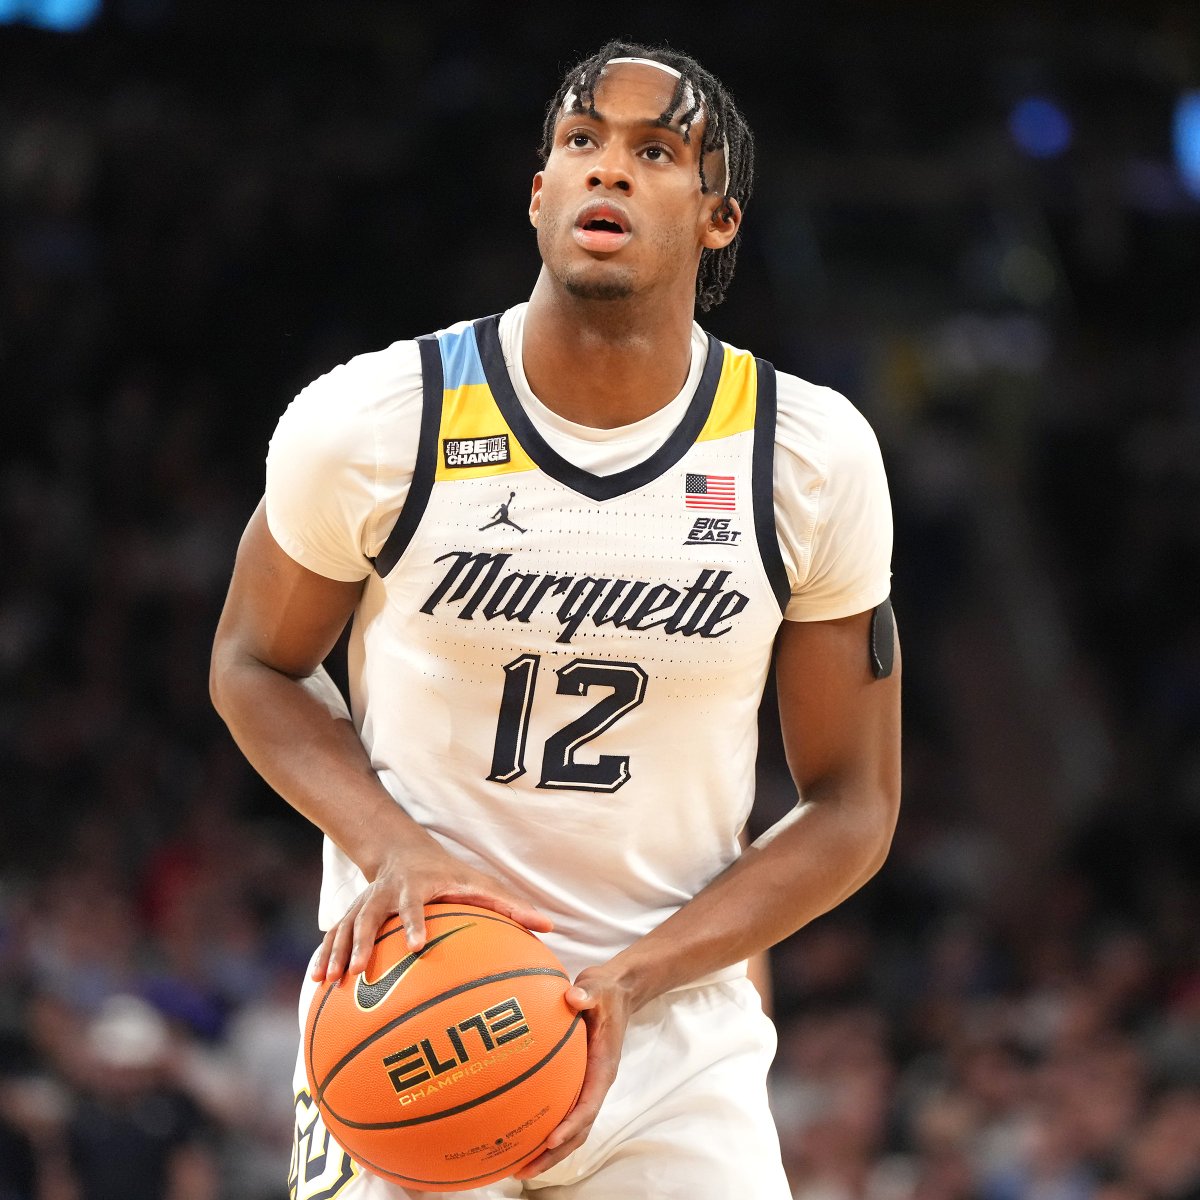 NEWS: Marquette's Olivier-Maxence Prosper has received a green room invite to attend the NBA Draft with his family on June 22nd, a source told ESPN. Prosper, now ranked No. 20 in the ESPN mock draft, has seen his stock skyrocket in the pre-draft process.